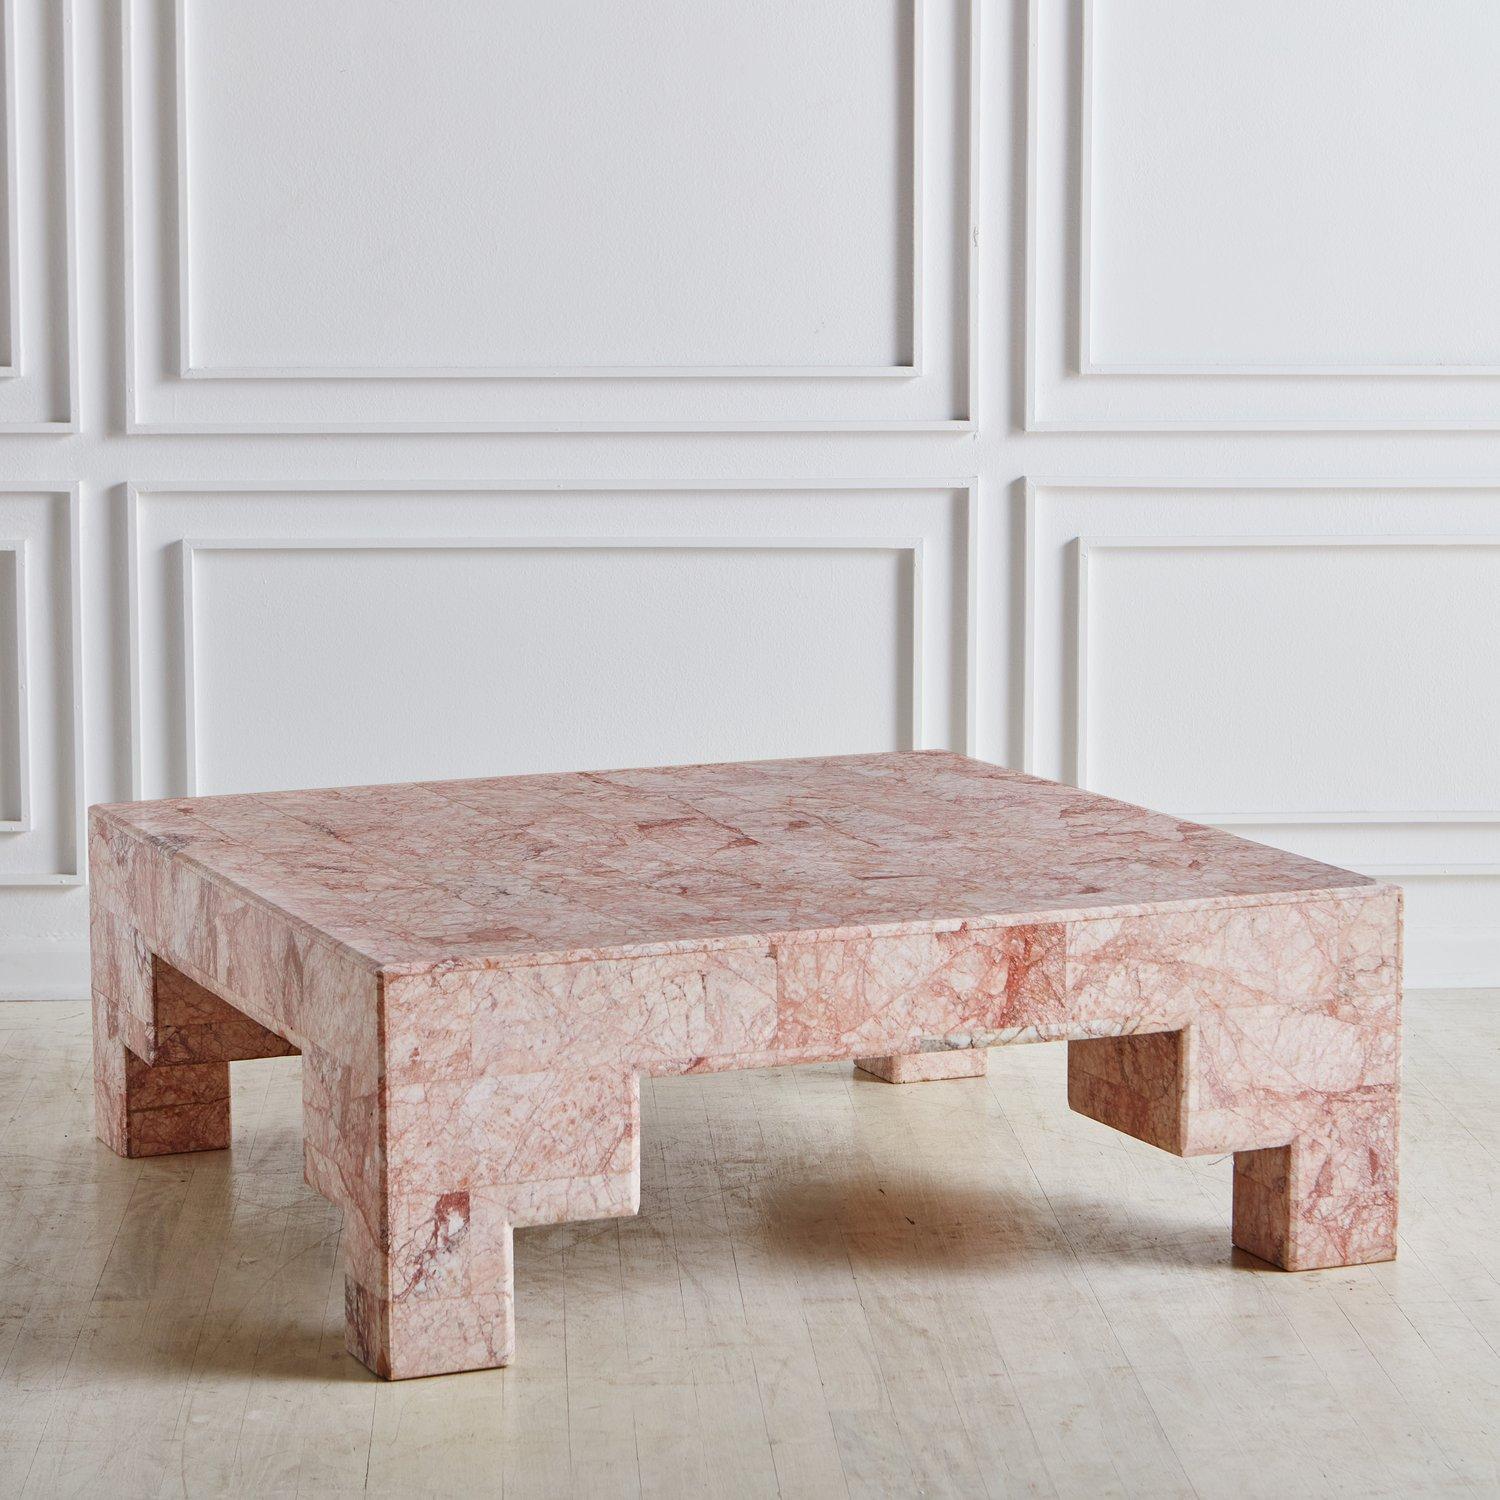 A monumental square coffee table constructed with wood clad in a tessellated pink spider marble with gorgeous pink, coral and white veining. This table has four sculptural block legs with geometric cutout details. USA, 20th Century.

